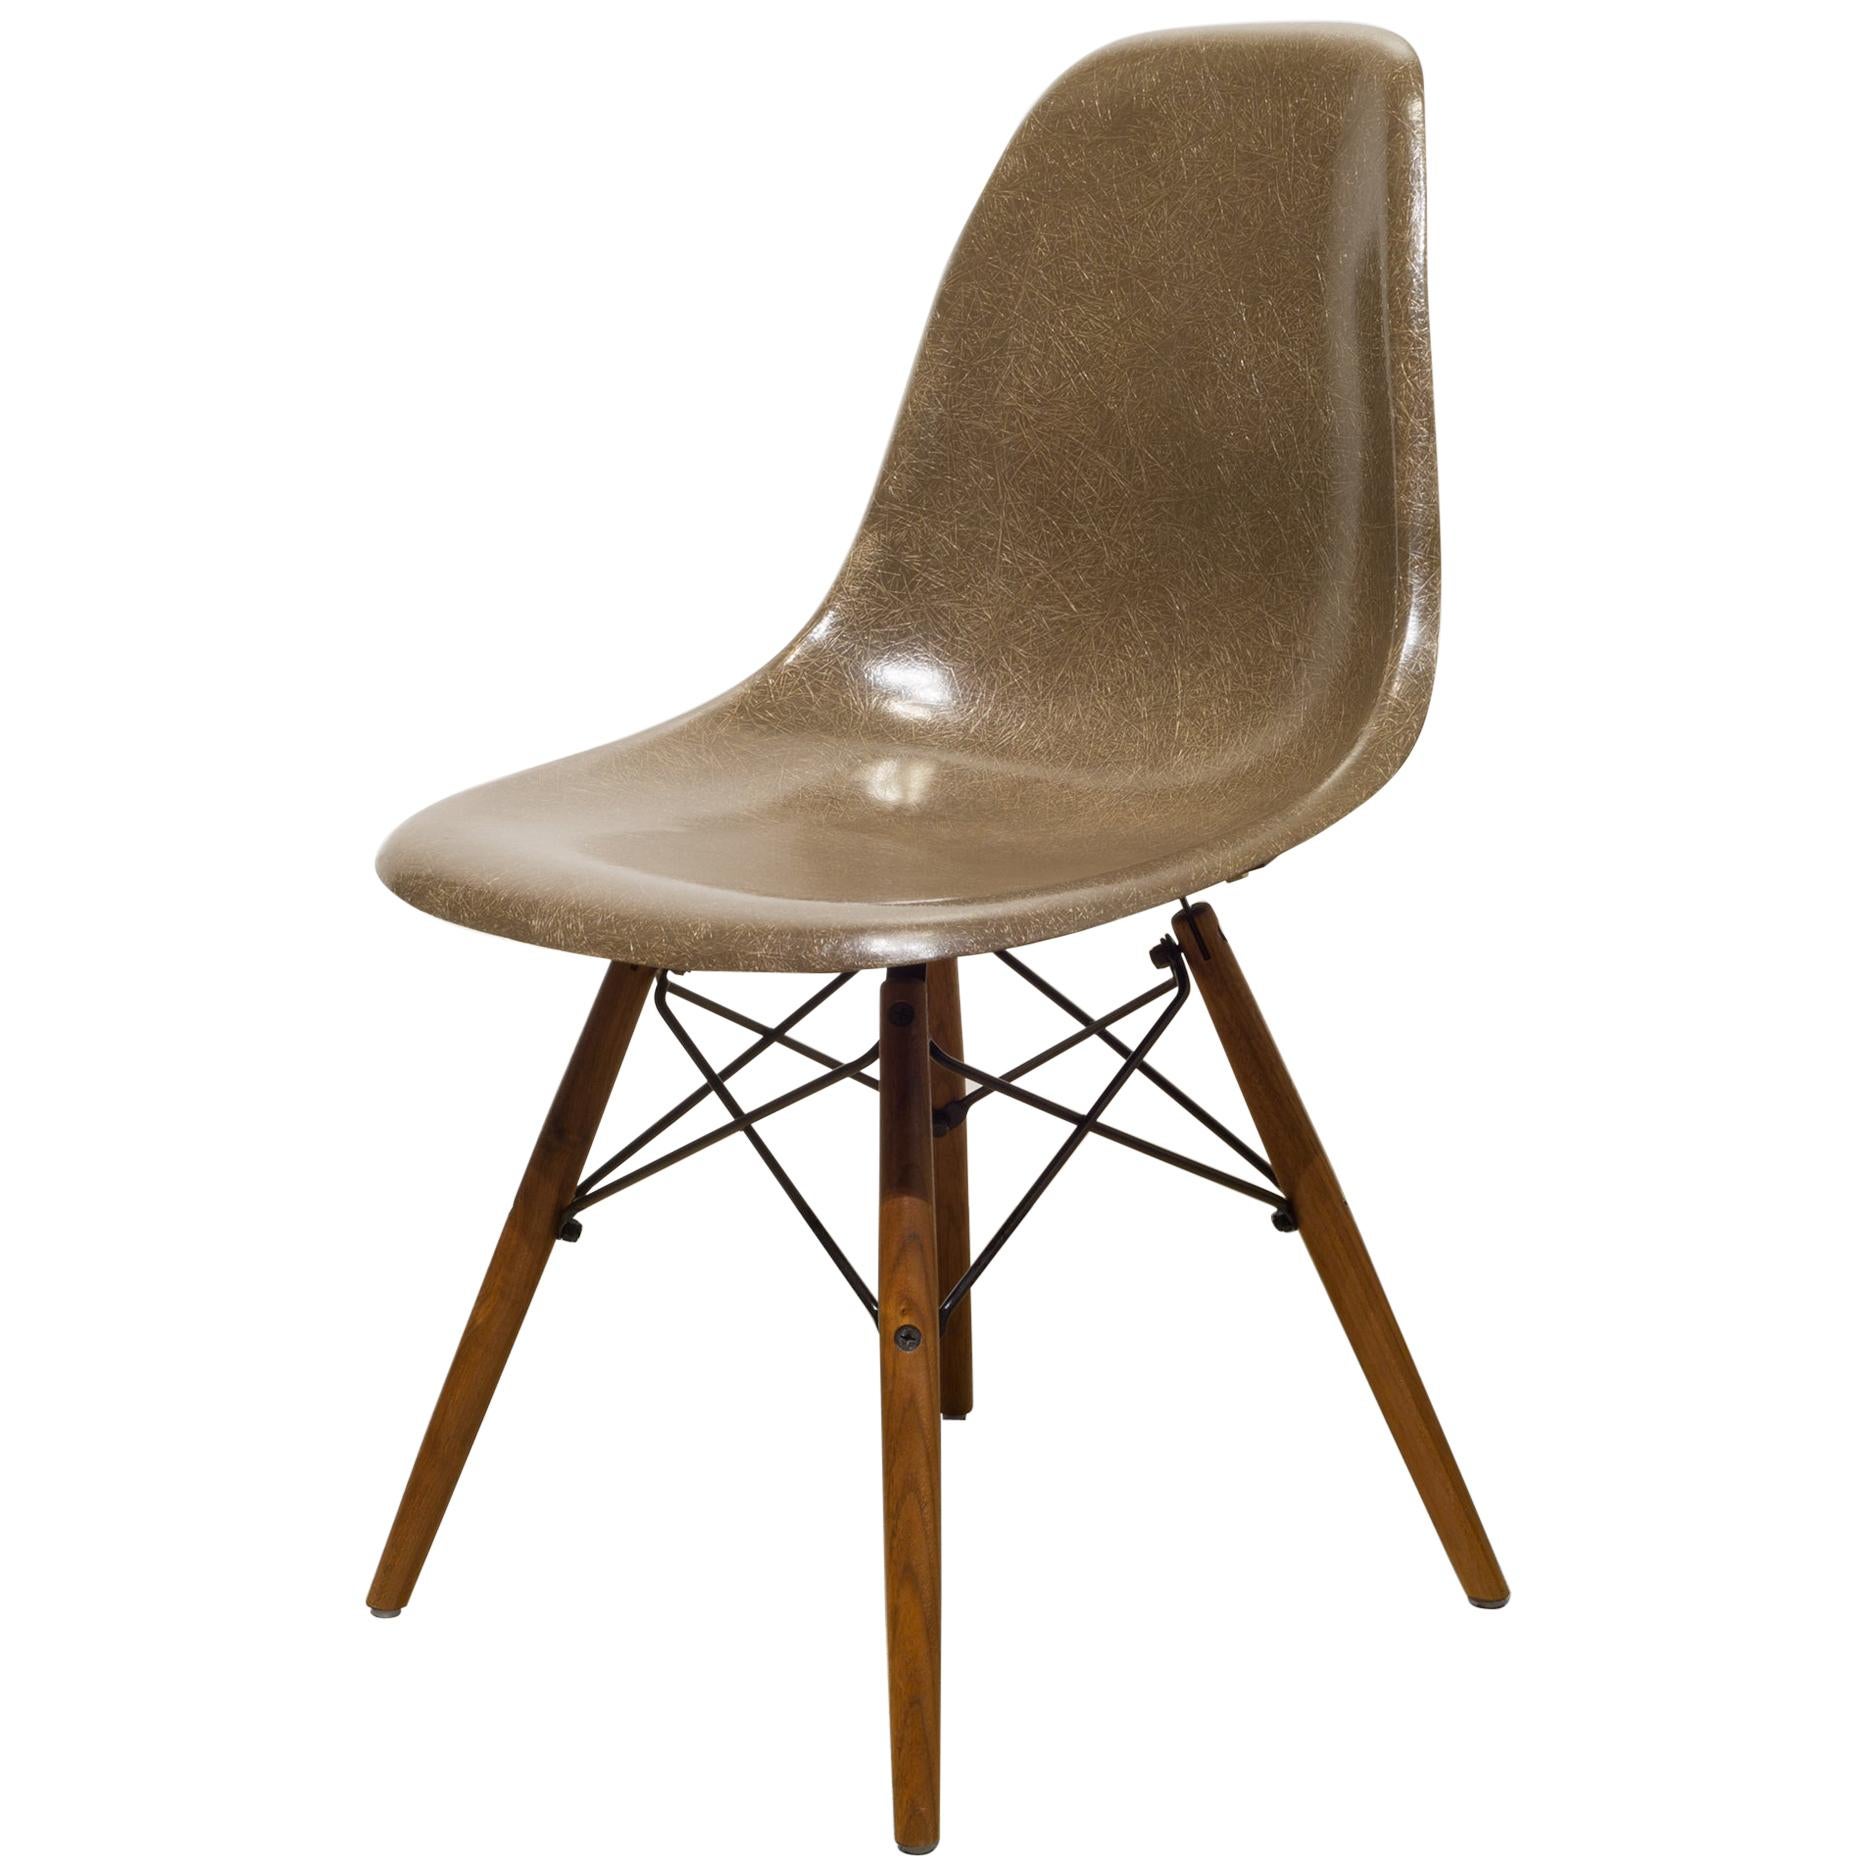 Eames for Herman Miller Fiberglass Shell Chair in Brown, circa 1950s